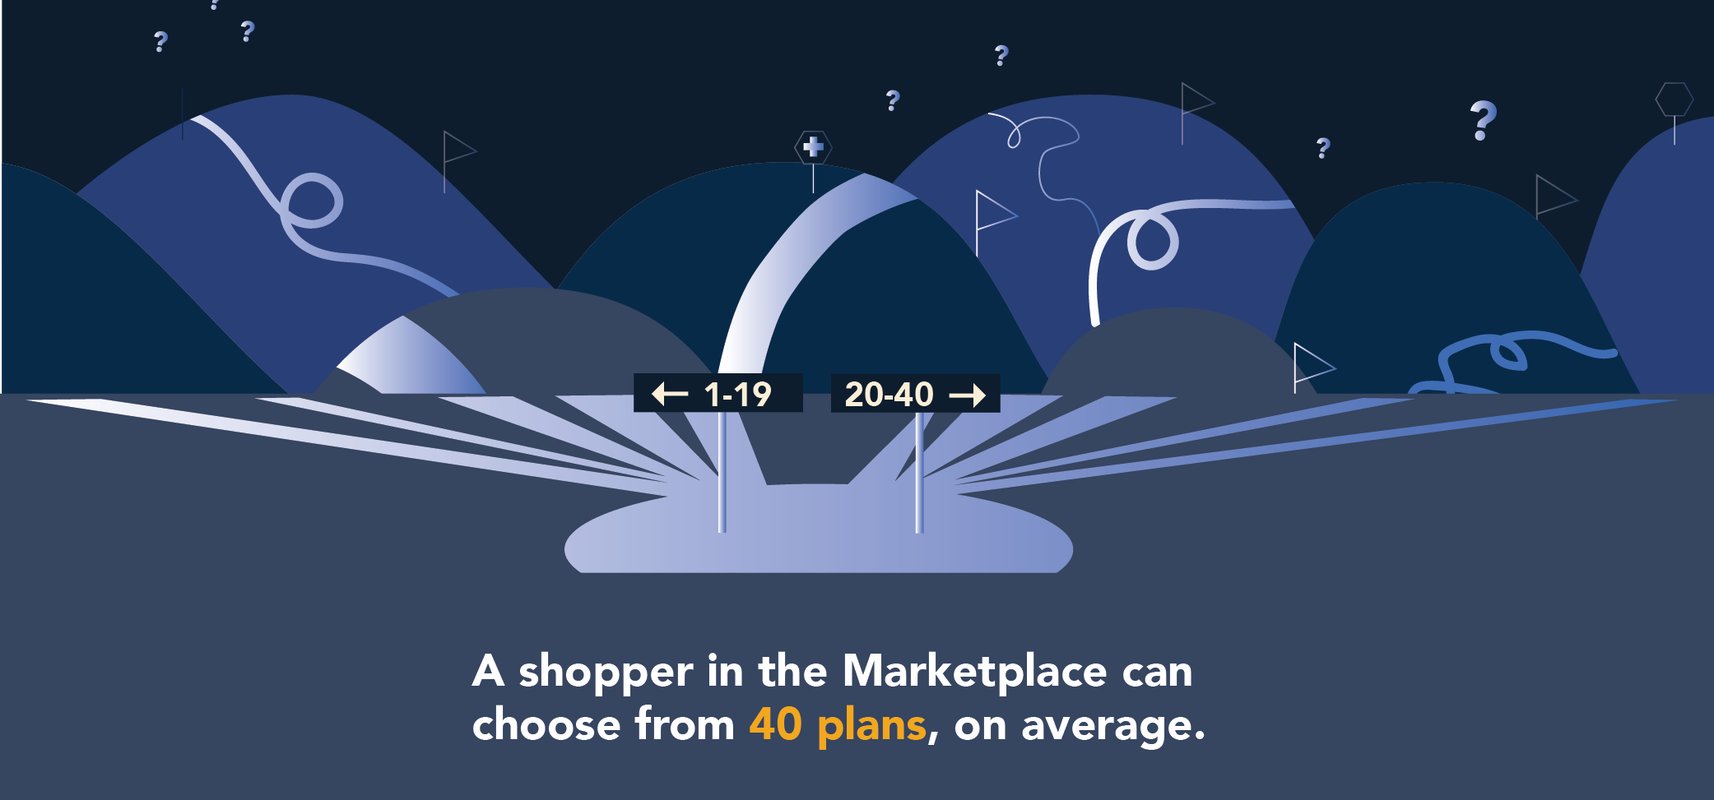 A shopper in the Marketplace can choose from 40 plans, on average.